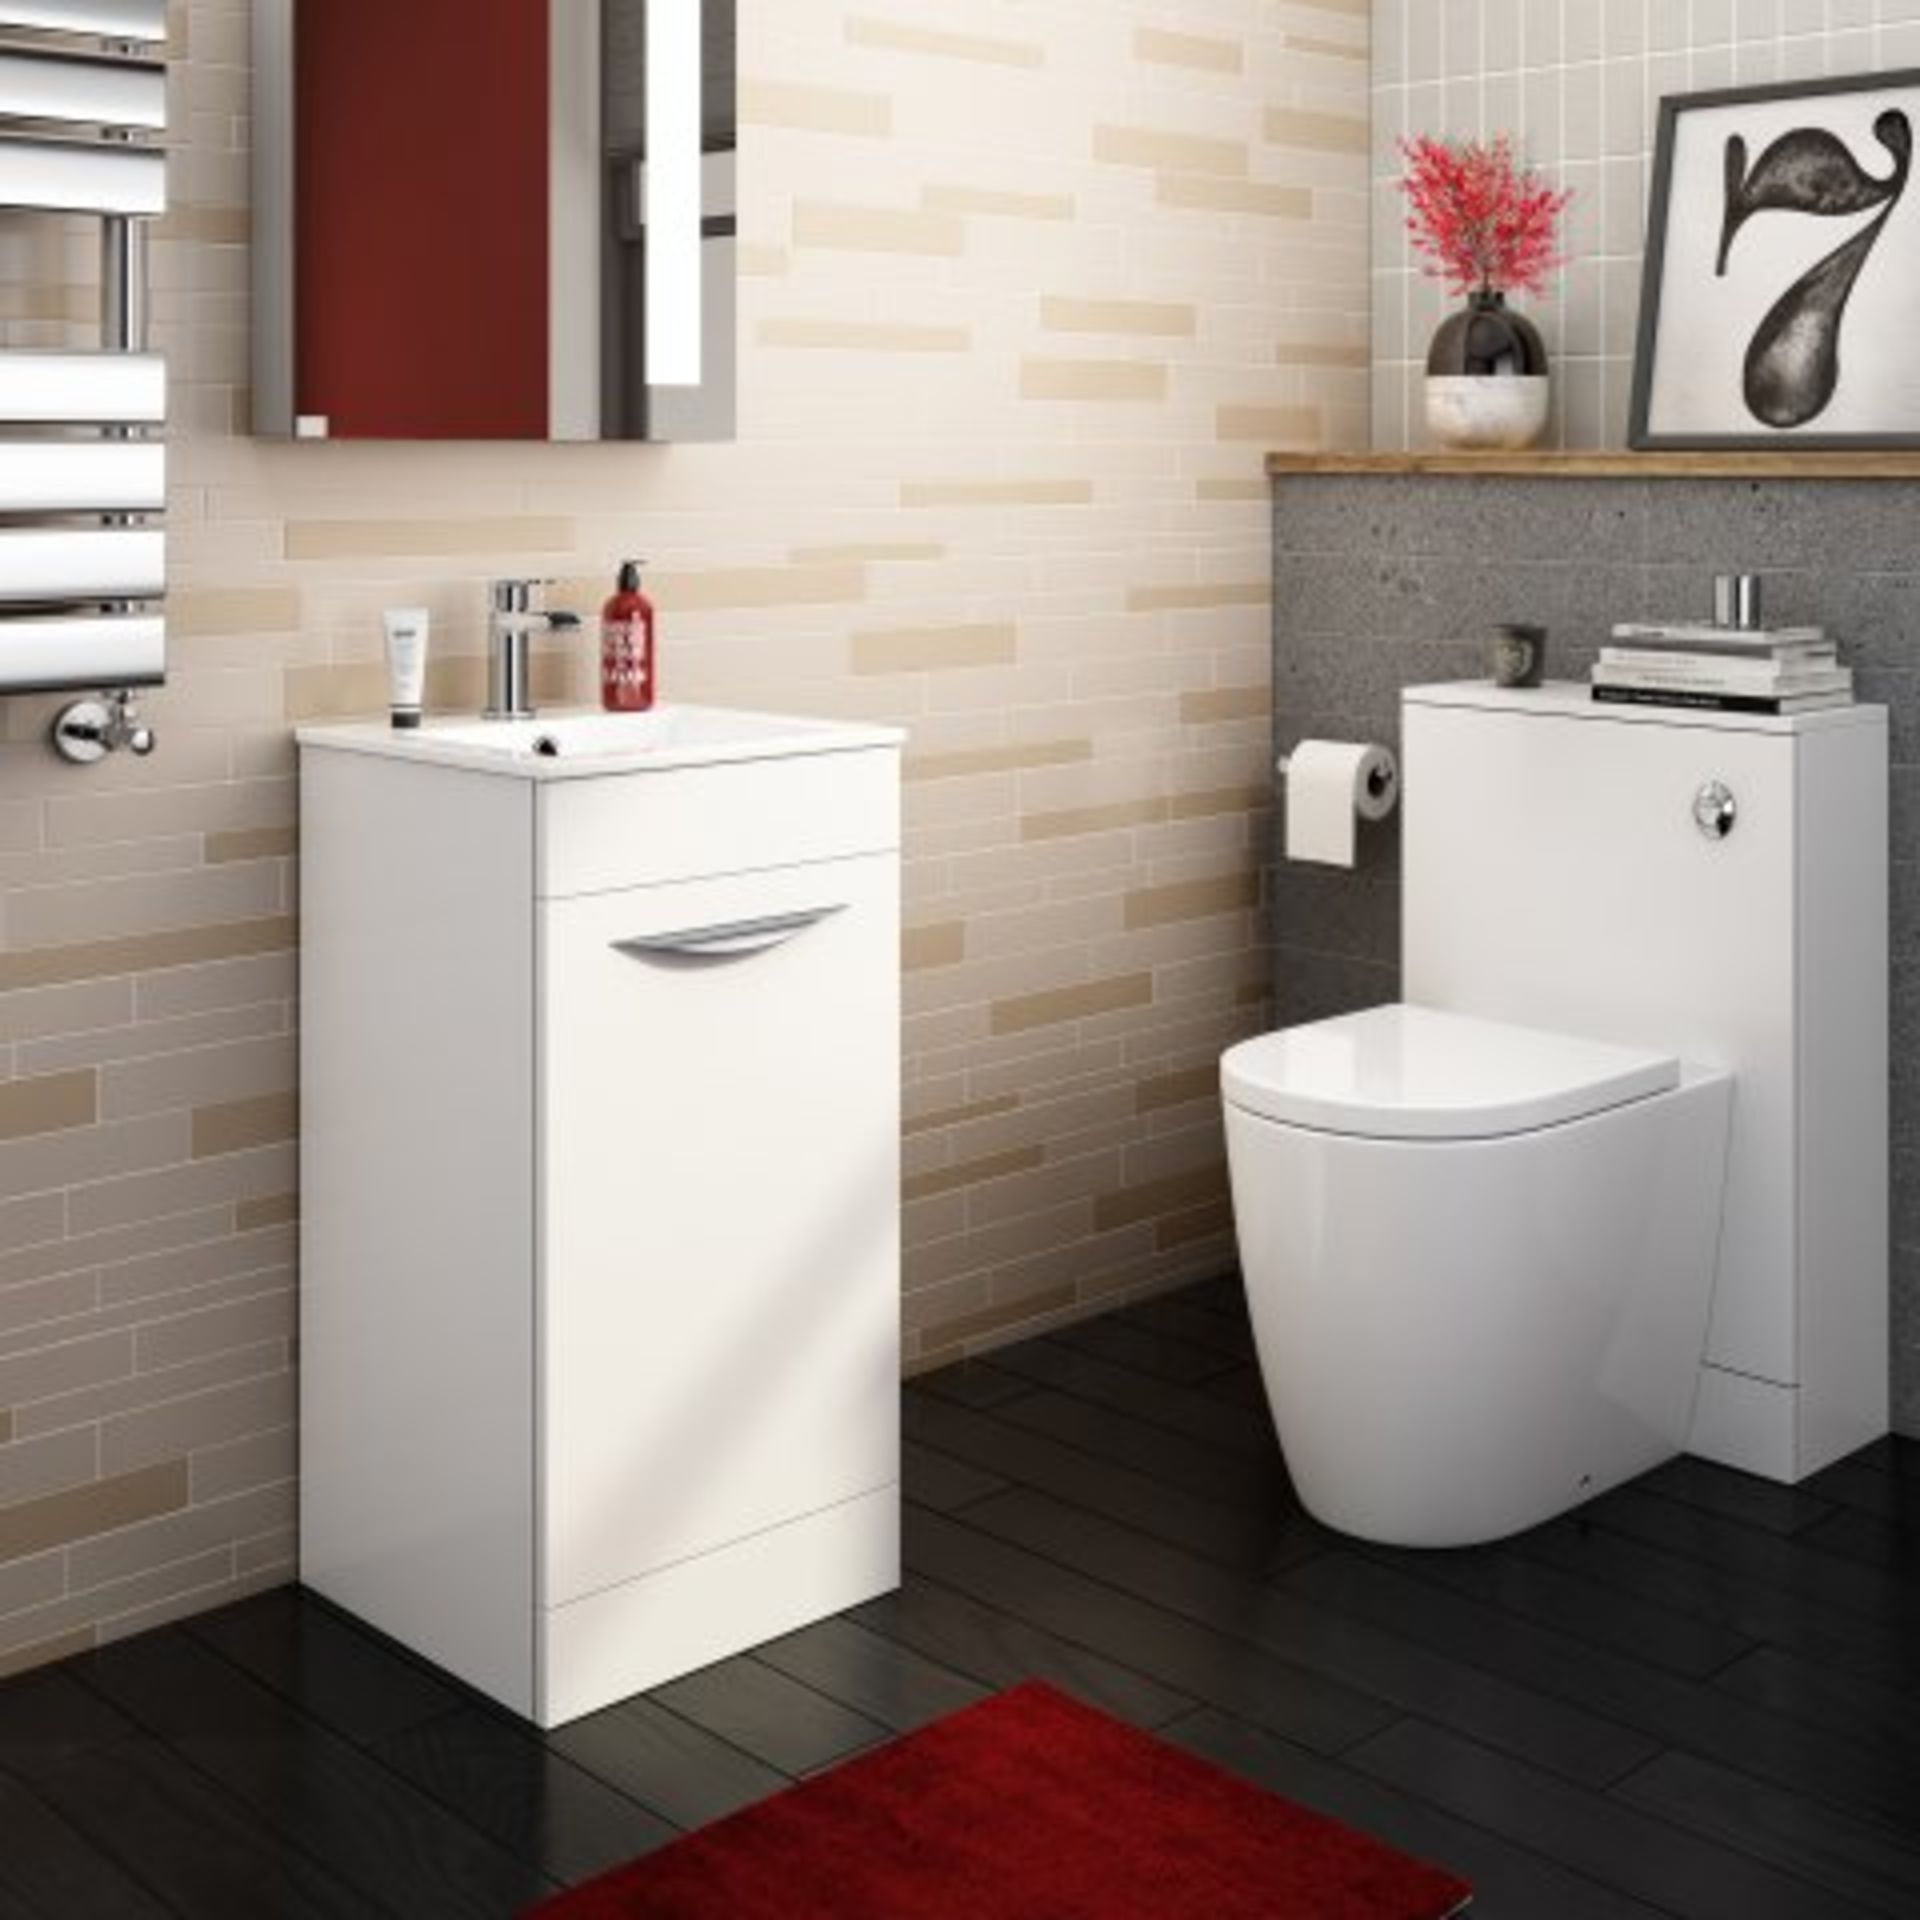 (I60) 400mm Severn High Gloss White Cloakroom Basin Cabinet - Floor Standing. RRP £212.99. COMES - Bild 3 aus 4